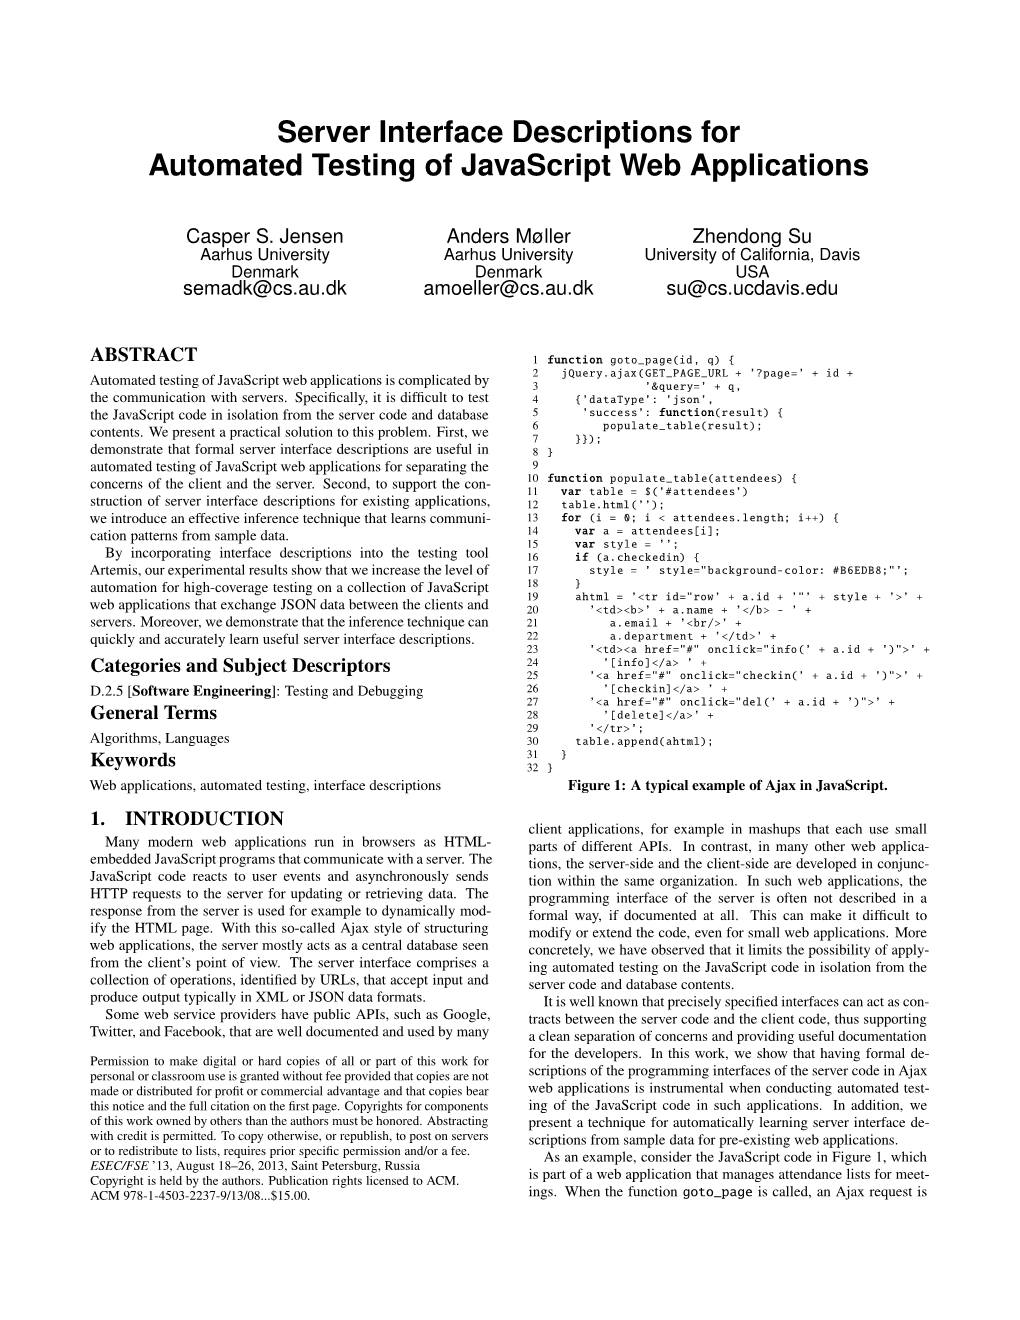 Server Interface Descriptions for Automated Testing of Javascript Web Applications